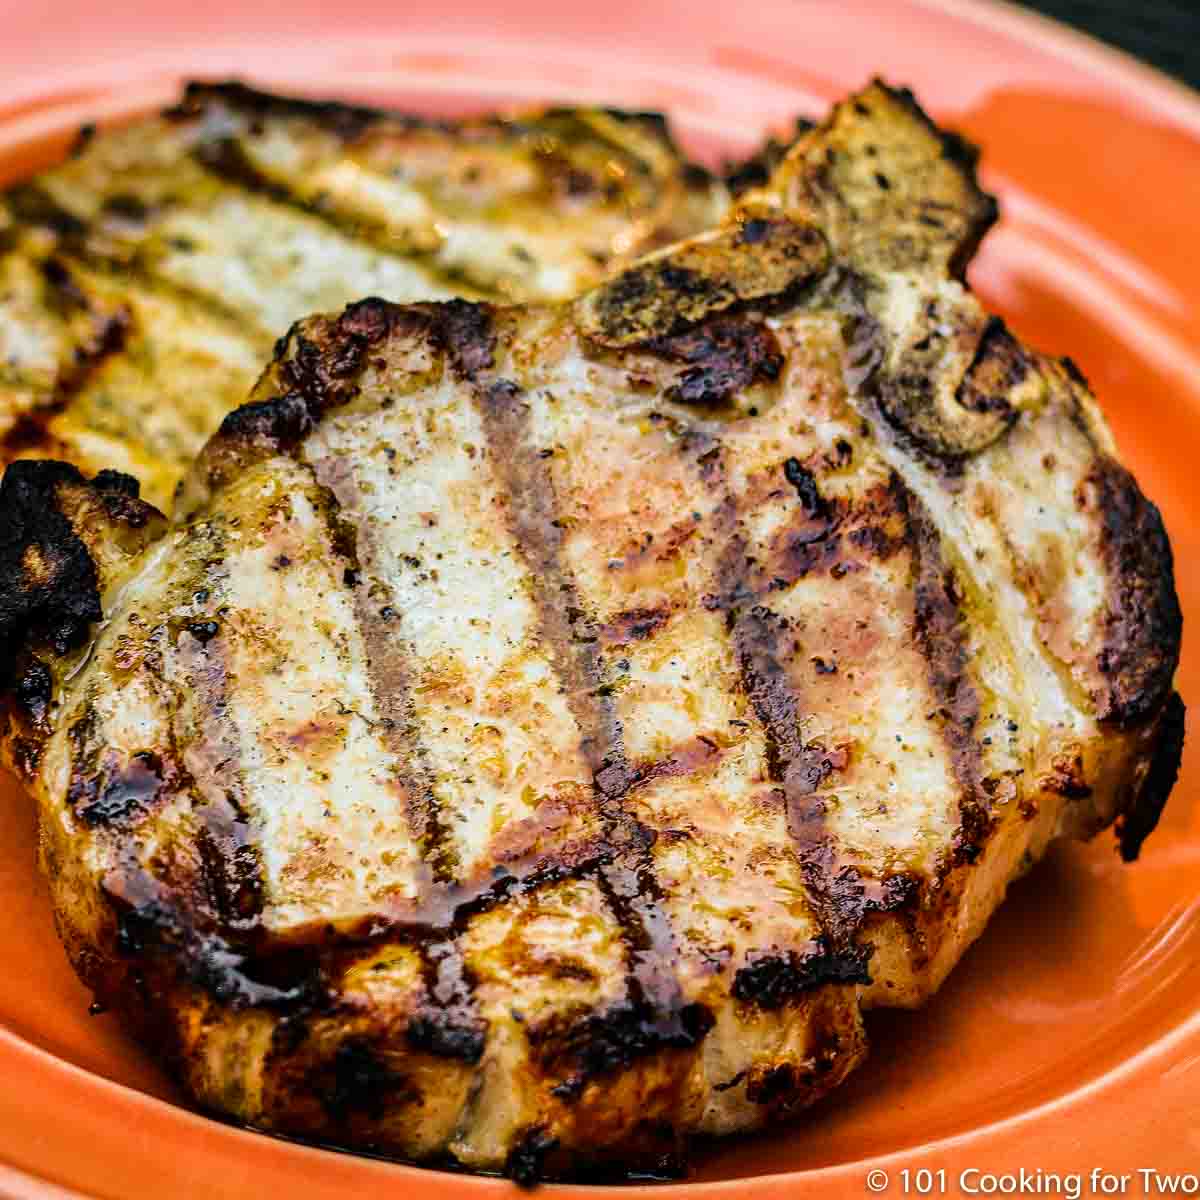 https://www.101cookingfortwo.com/wp-content/uploads/2017/08/How-to-Grill-Pork-Chops-on-a-Gas-Grill-1.jpg